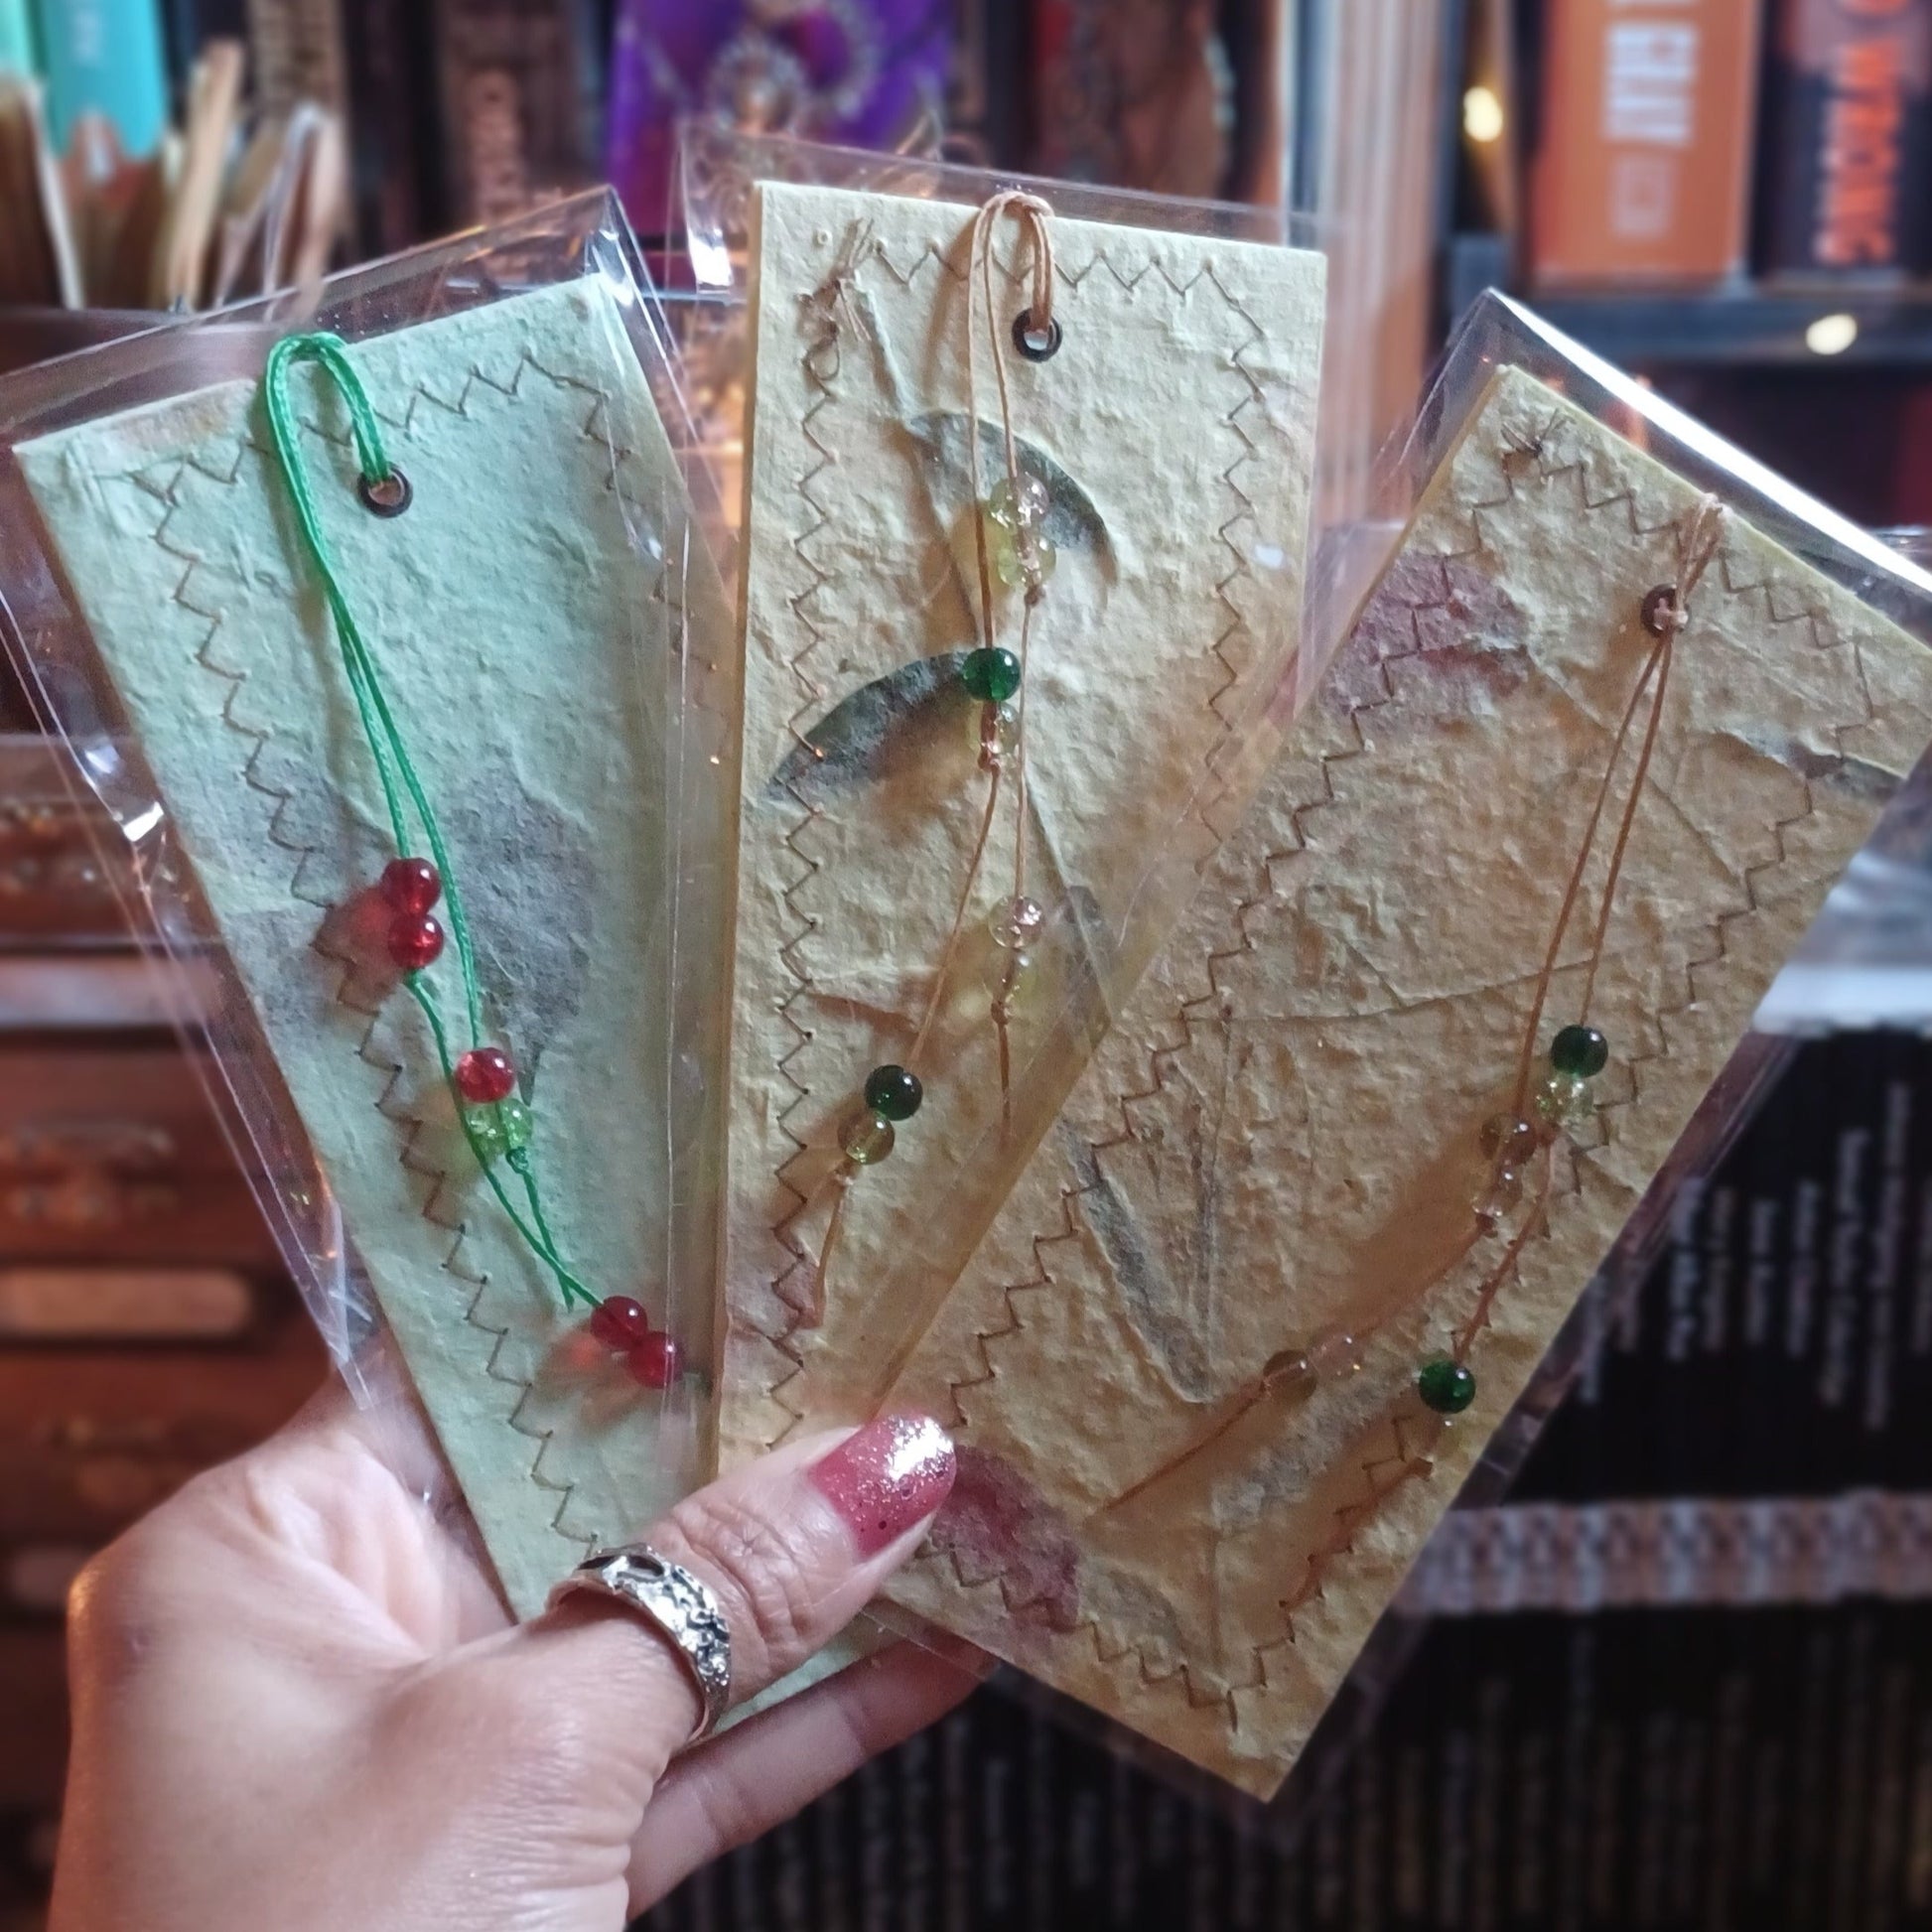 Green and yellow - Handmade Paper Bookmarks with Stitched Edges, Pressed Flowers and Leaves